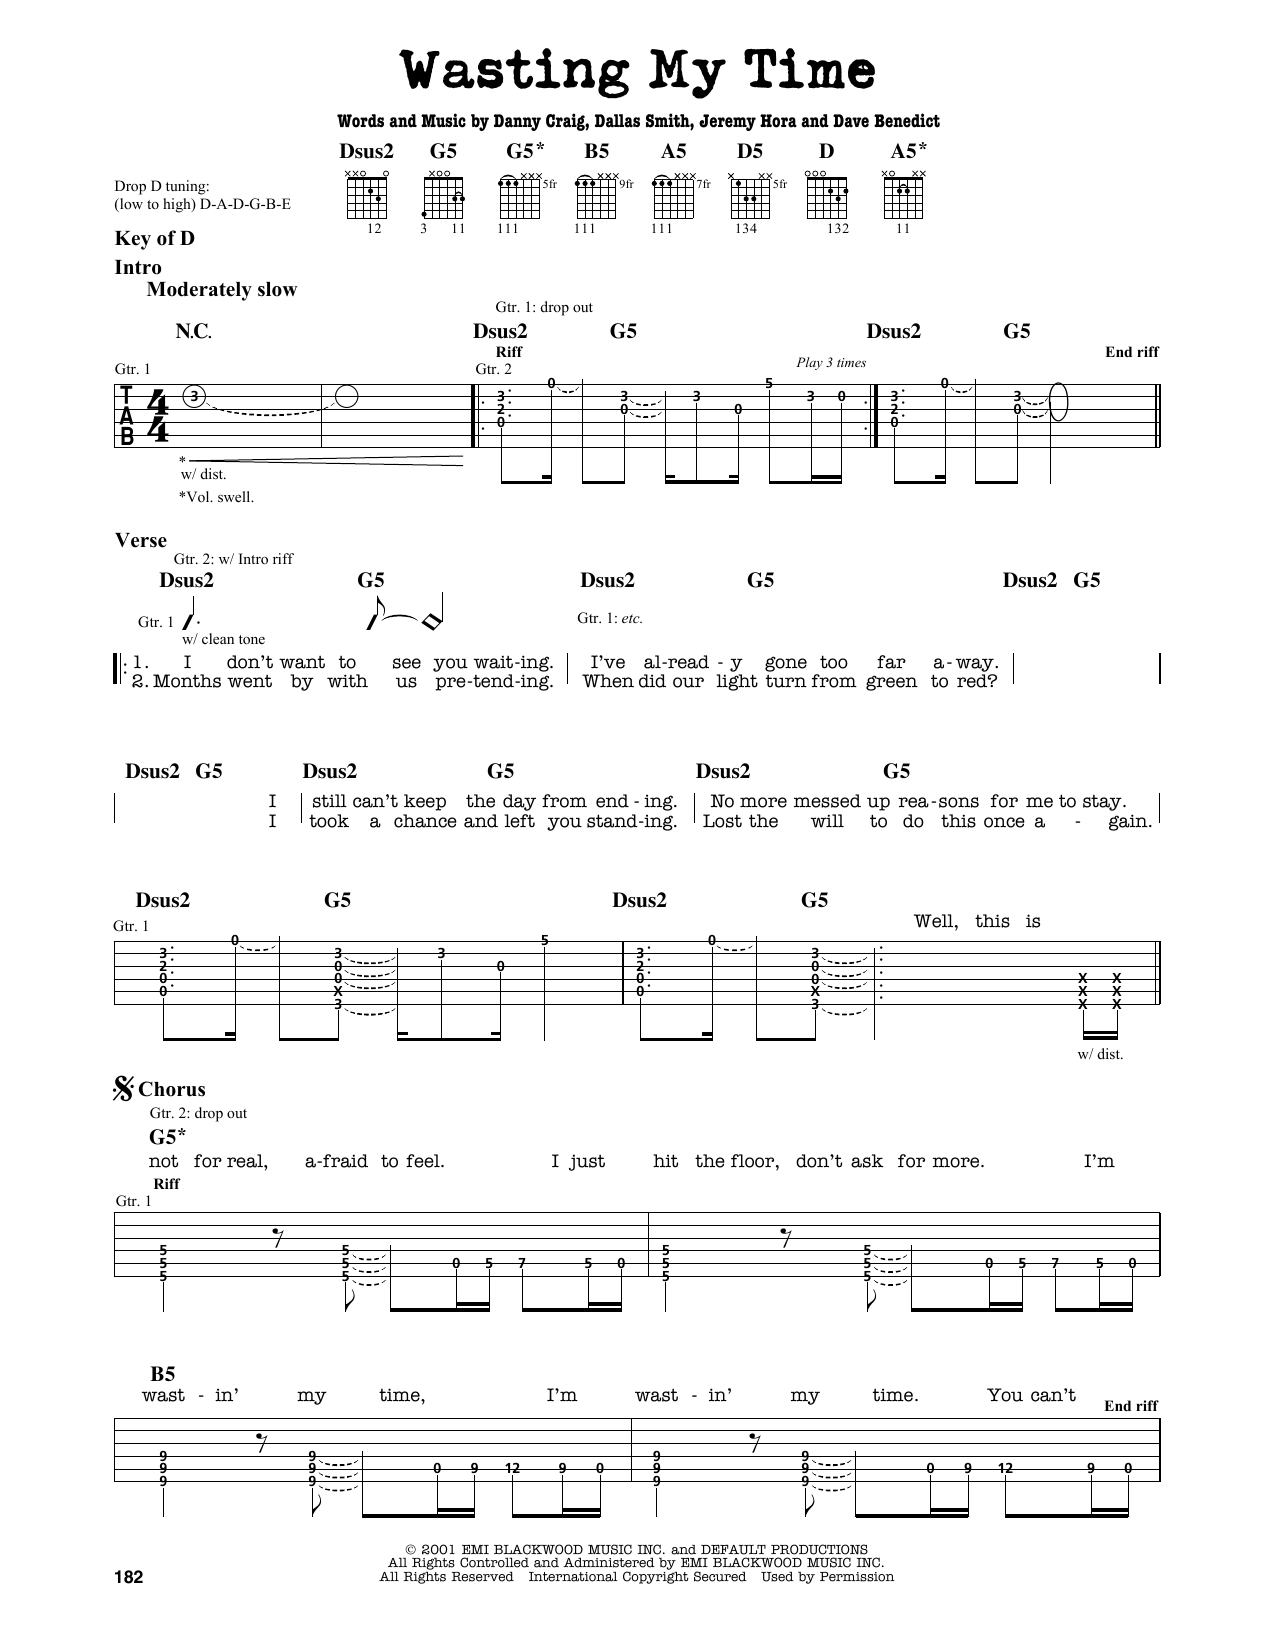 Download Default Wasting My Time Sheet Music